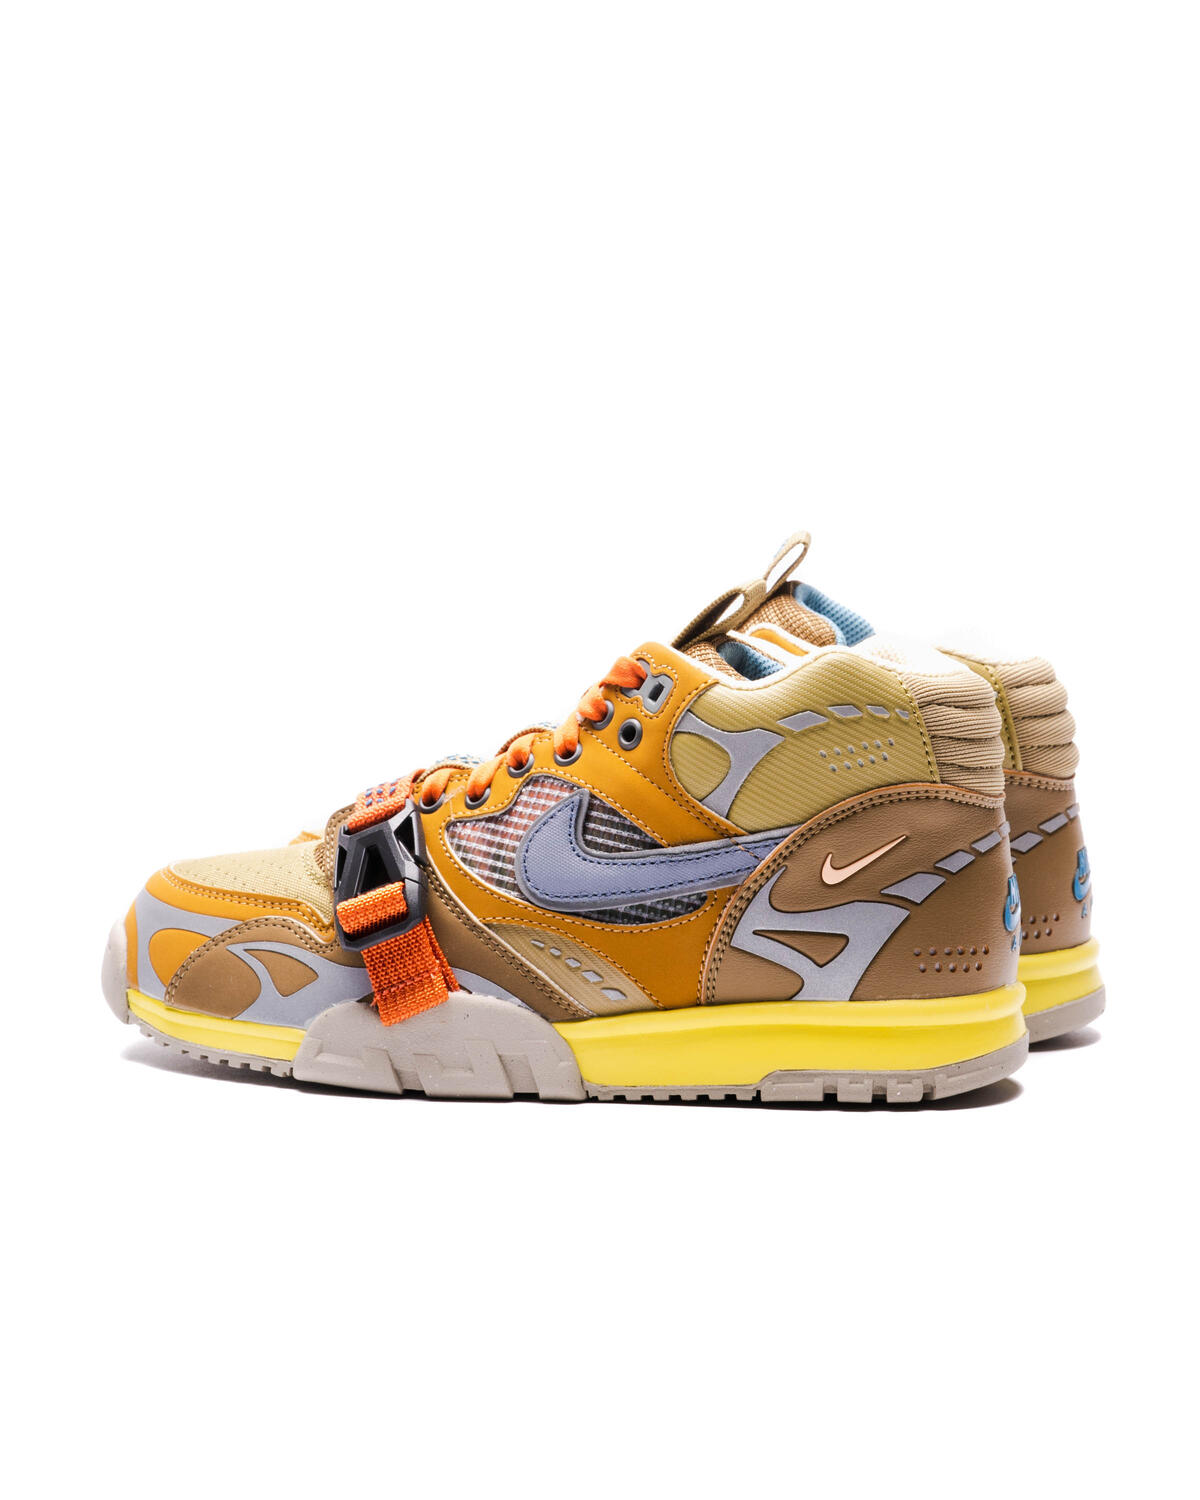 NIKE Air Trainer 1 SP DH7338300 AFEW STORE